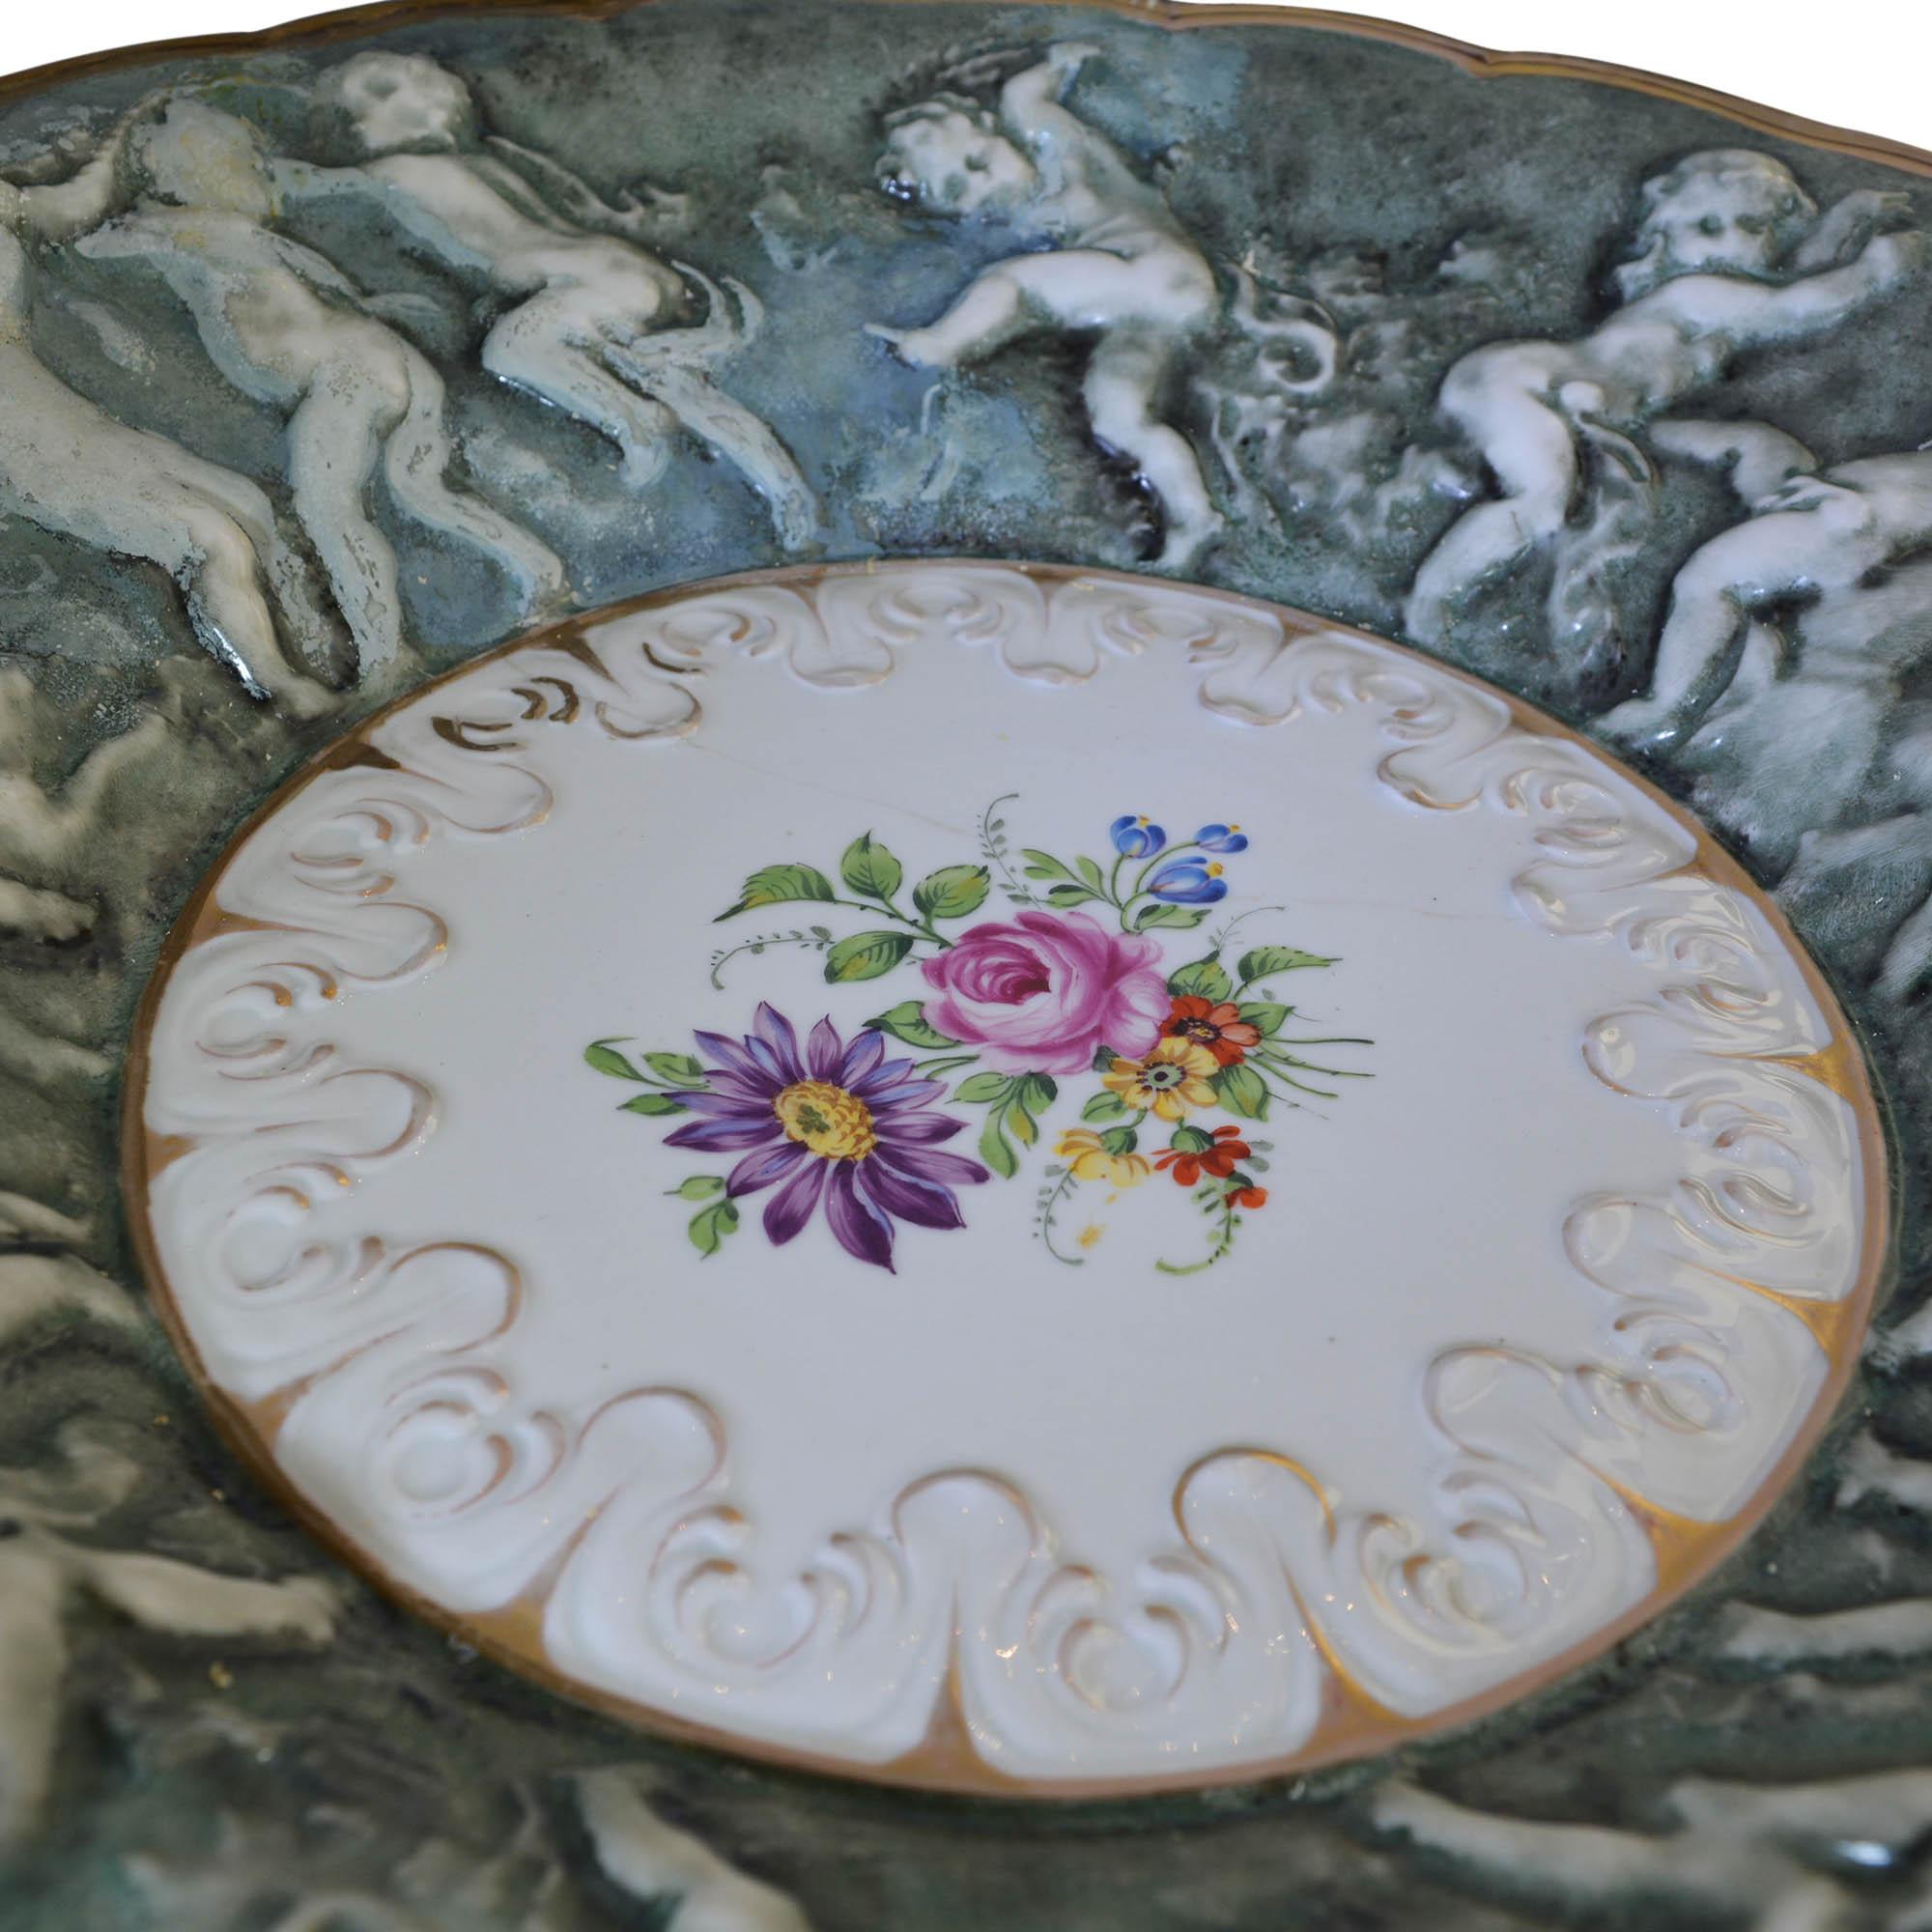 Vintage Von Schierholz bowl or platter has 14 putti dancing around the scalloped rim and features a centre floral design. The heavily three dimensional detailed rim is green with the centre a white porcelain. Gold gilt highlights.